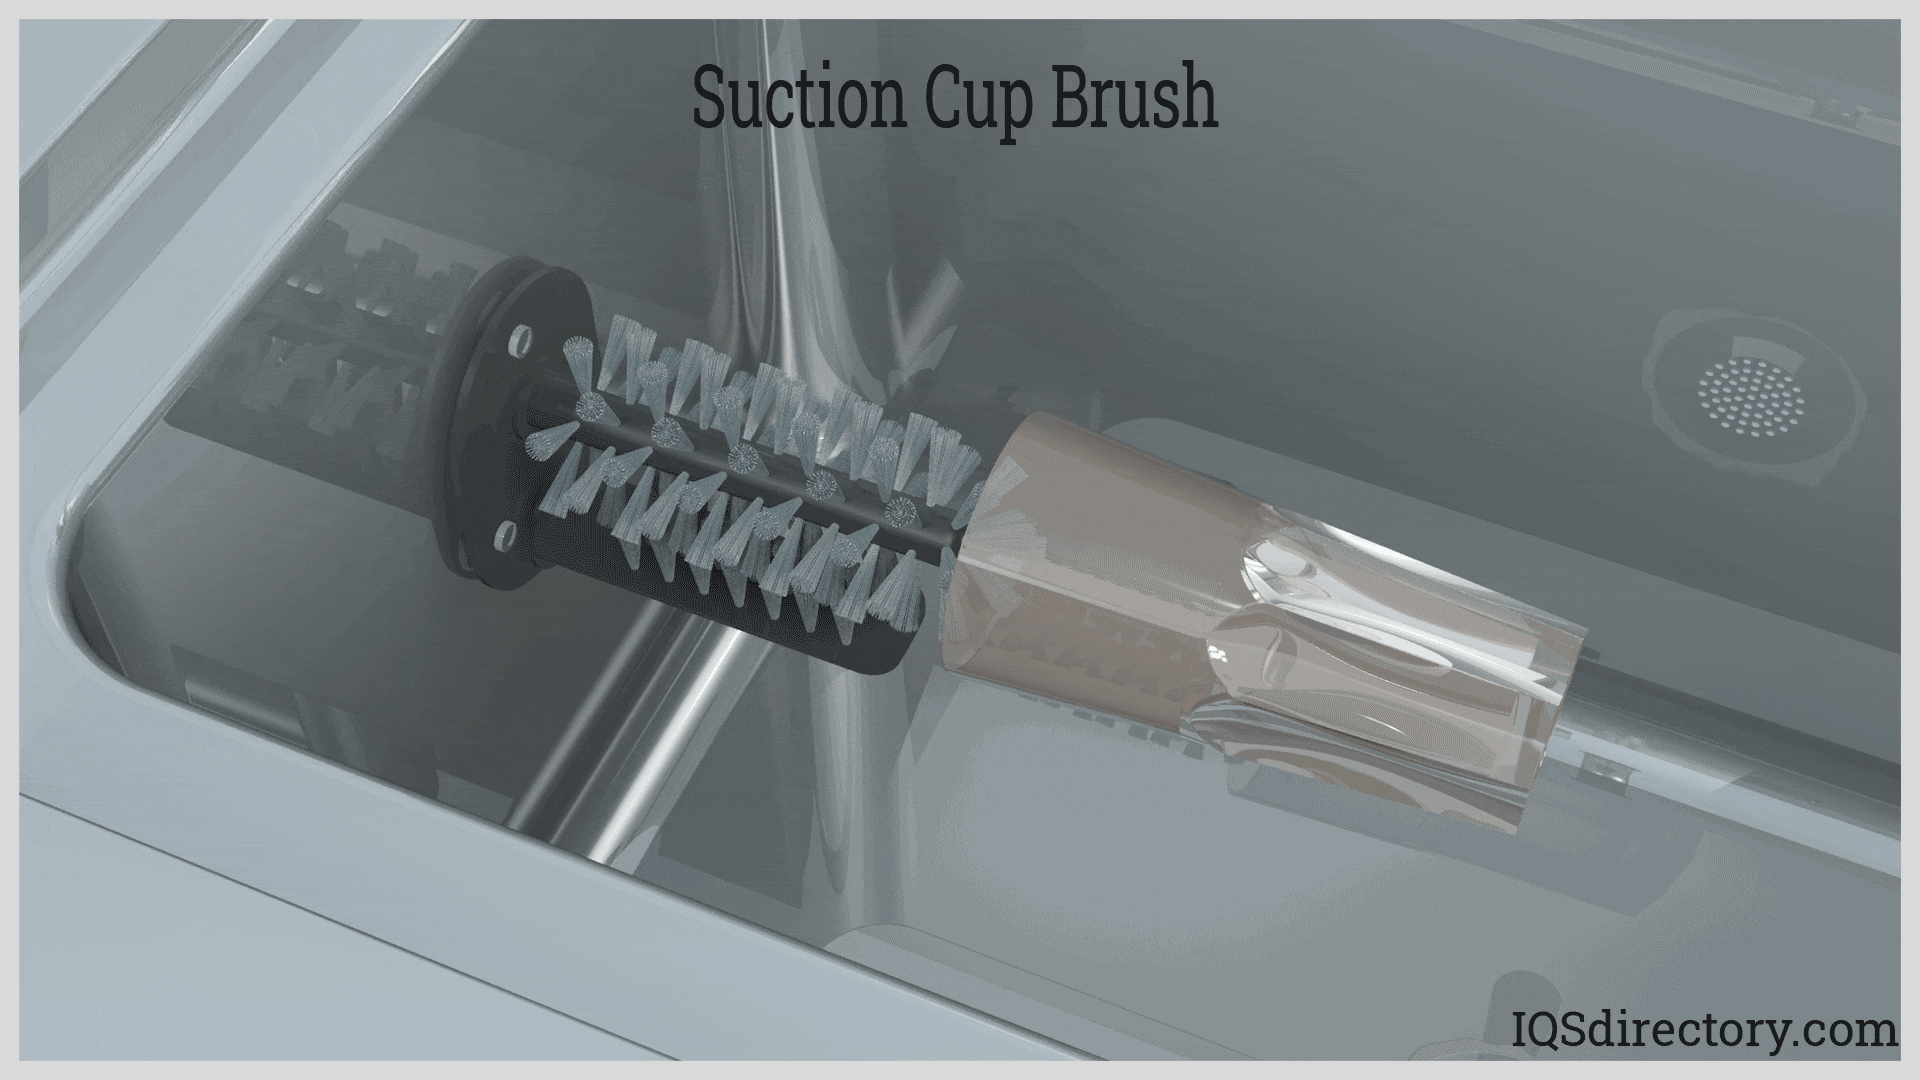 Simply Natural Electric Spin Brush Scrubber with Extension Pole